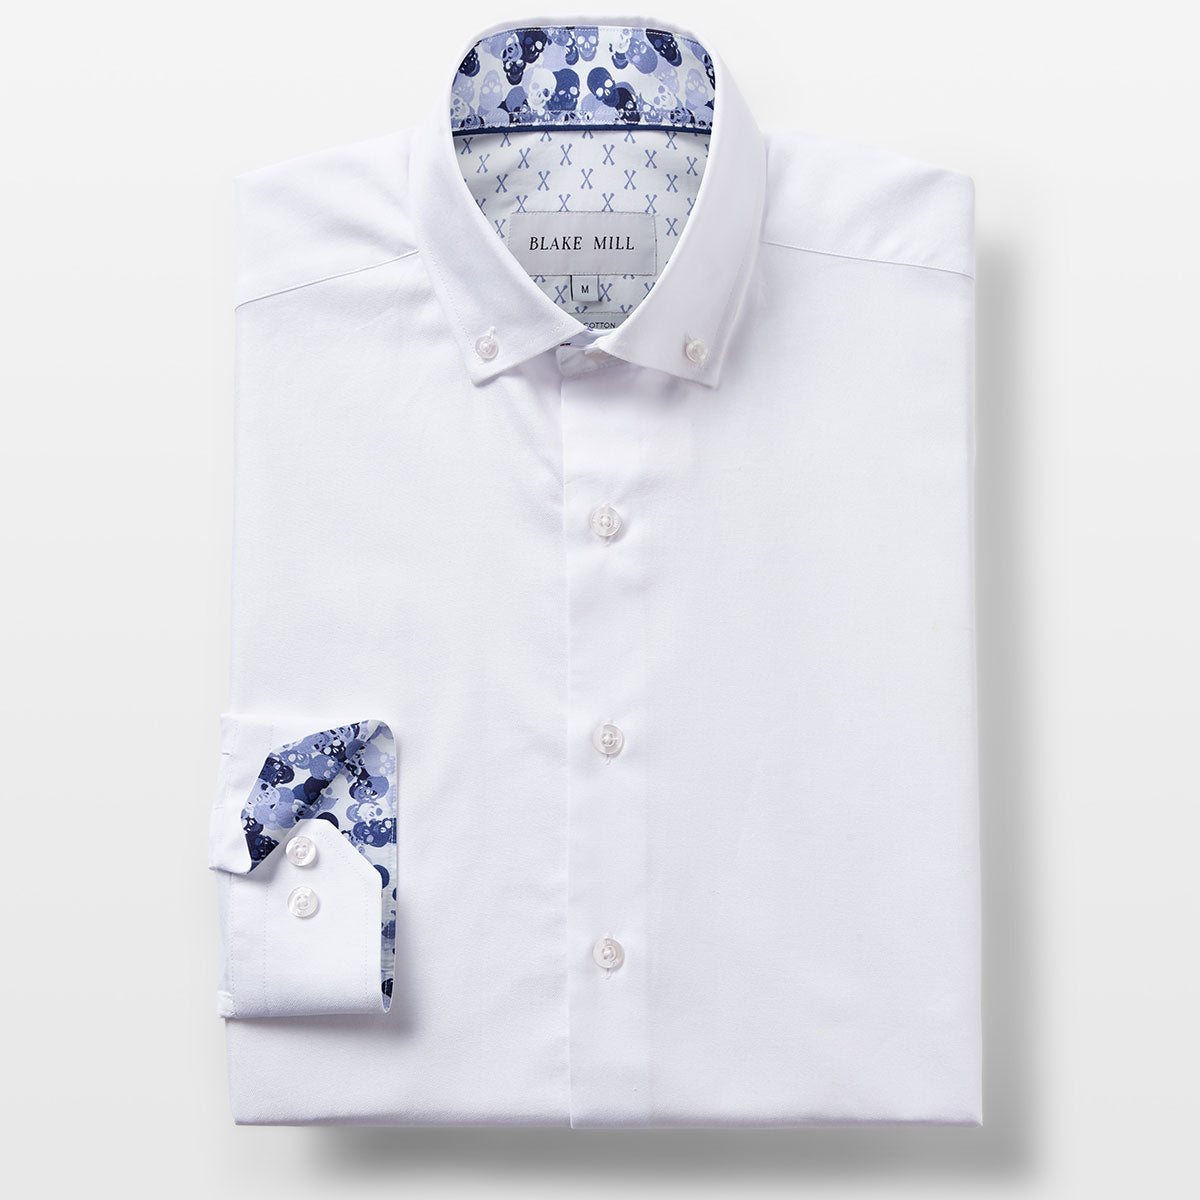 White Oxford with Skulls Accents Button-Down Shirt - Blake Mill